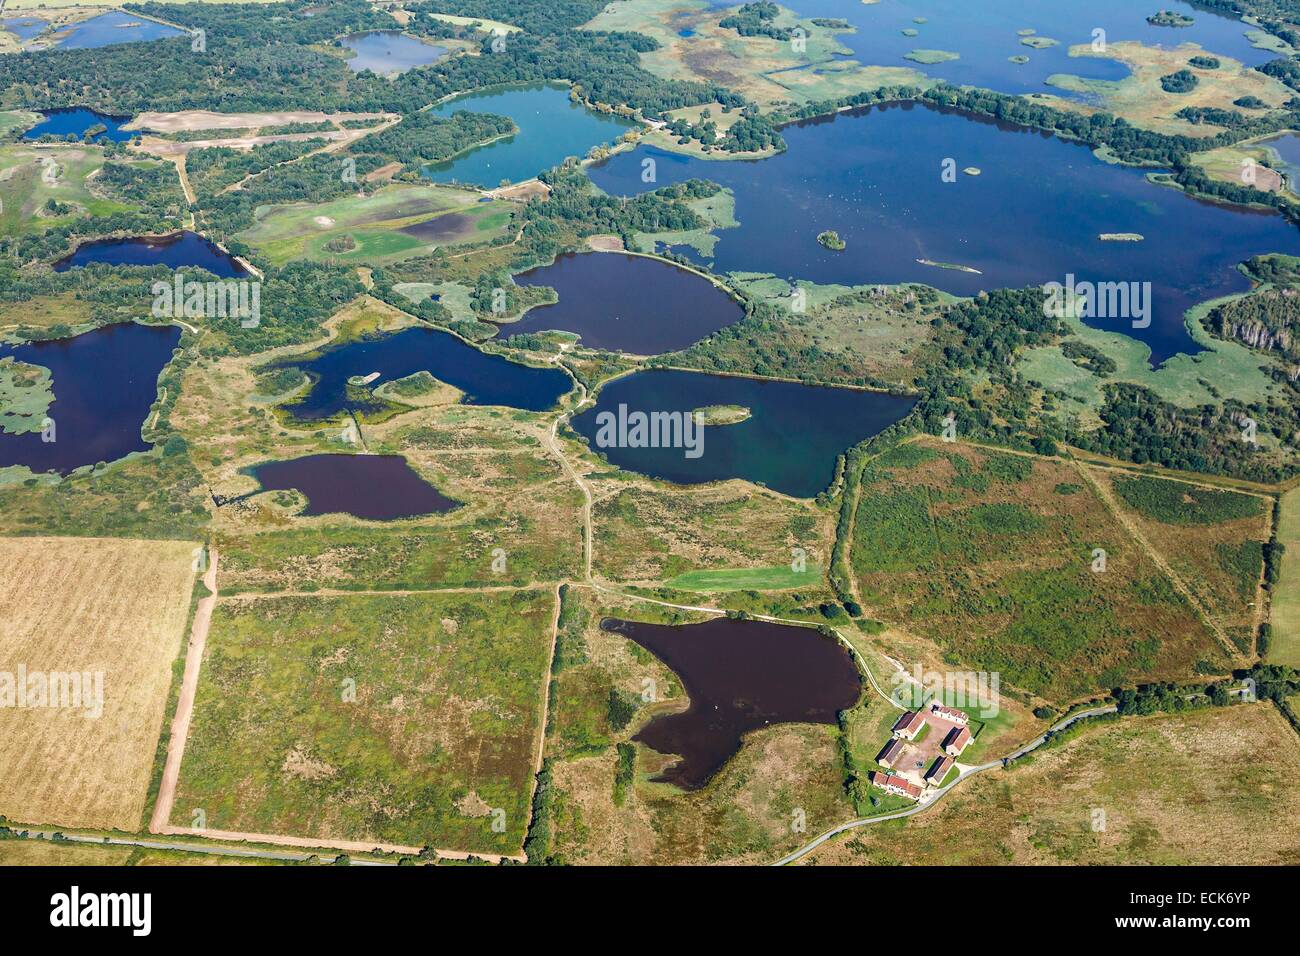 France, Indre, Migne, ponds in La Brenne regional park (aerial view) Stock Photo